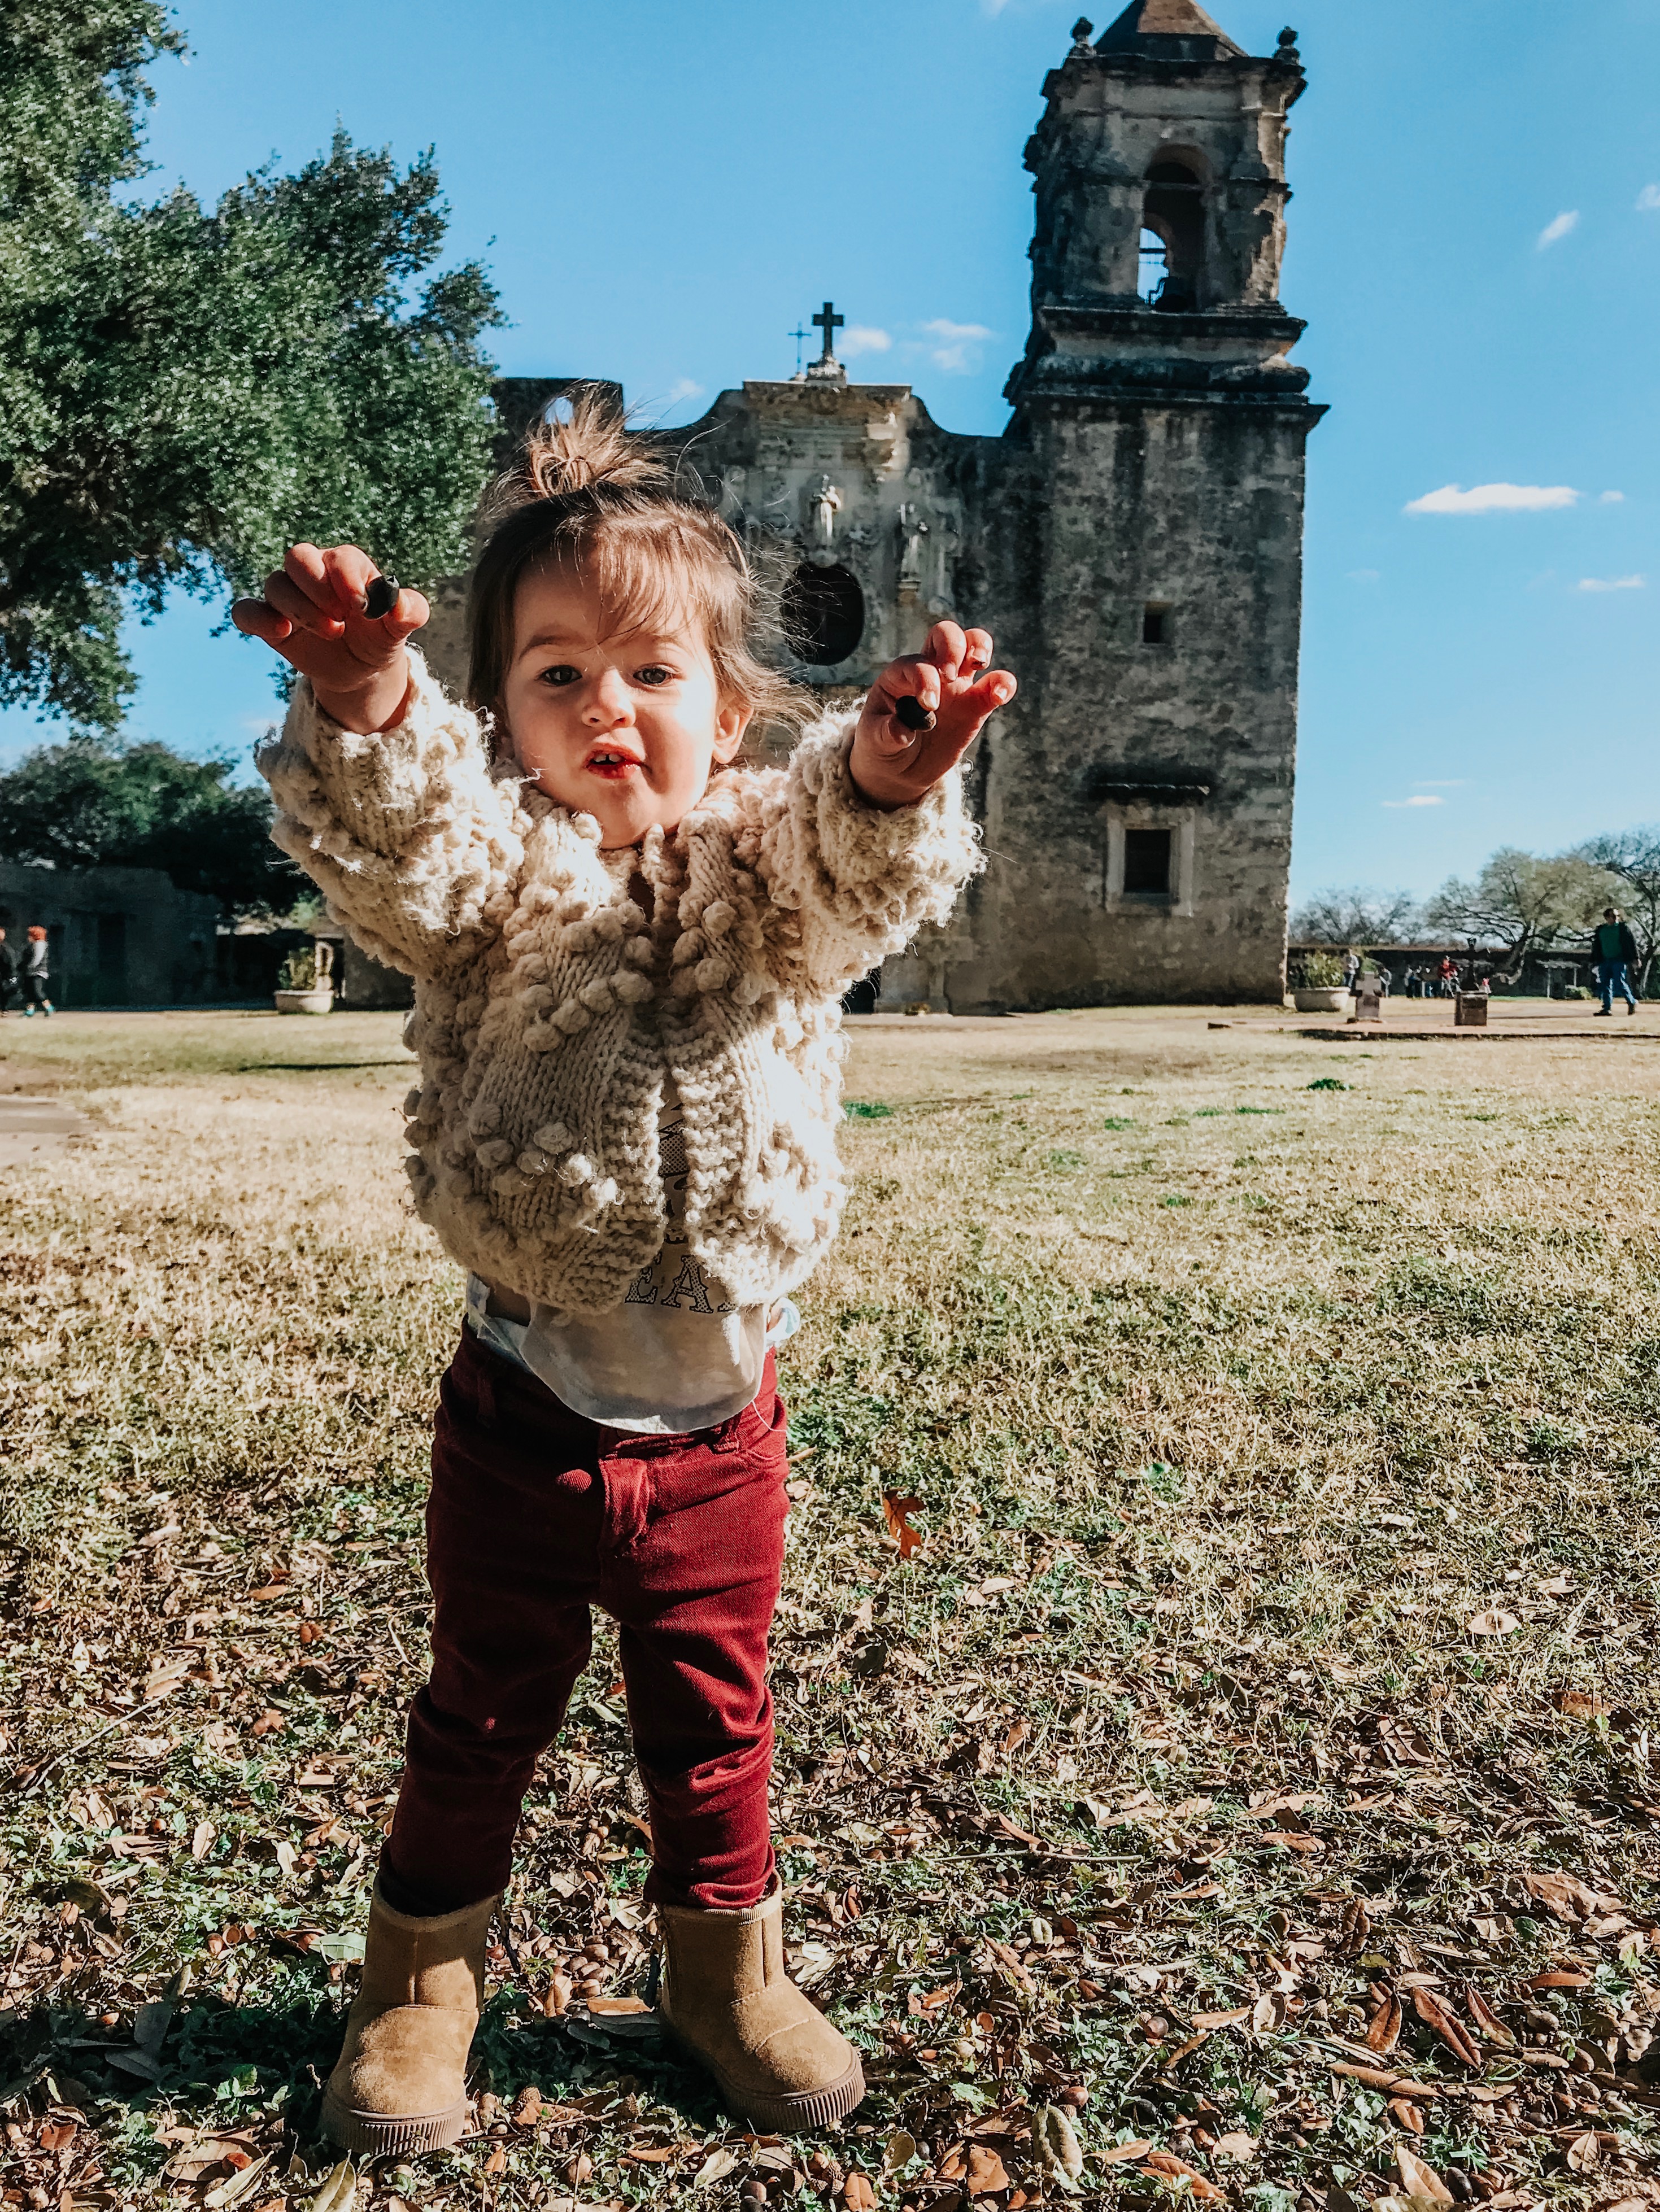 San Antonio in Winter featured by top US travel blog Lone Star Looking Glass; Image of little girl playing